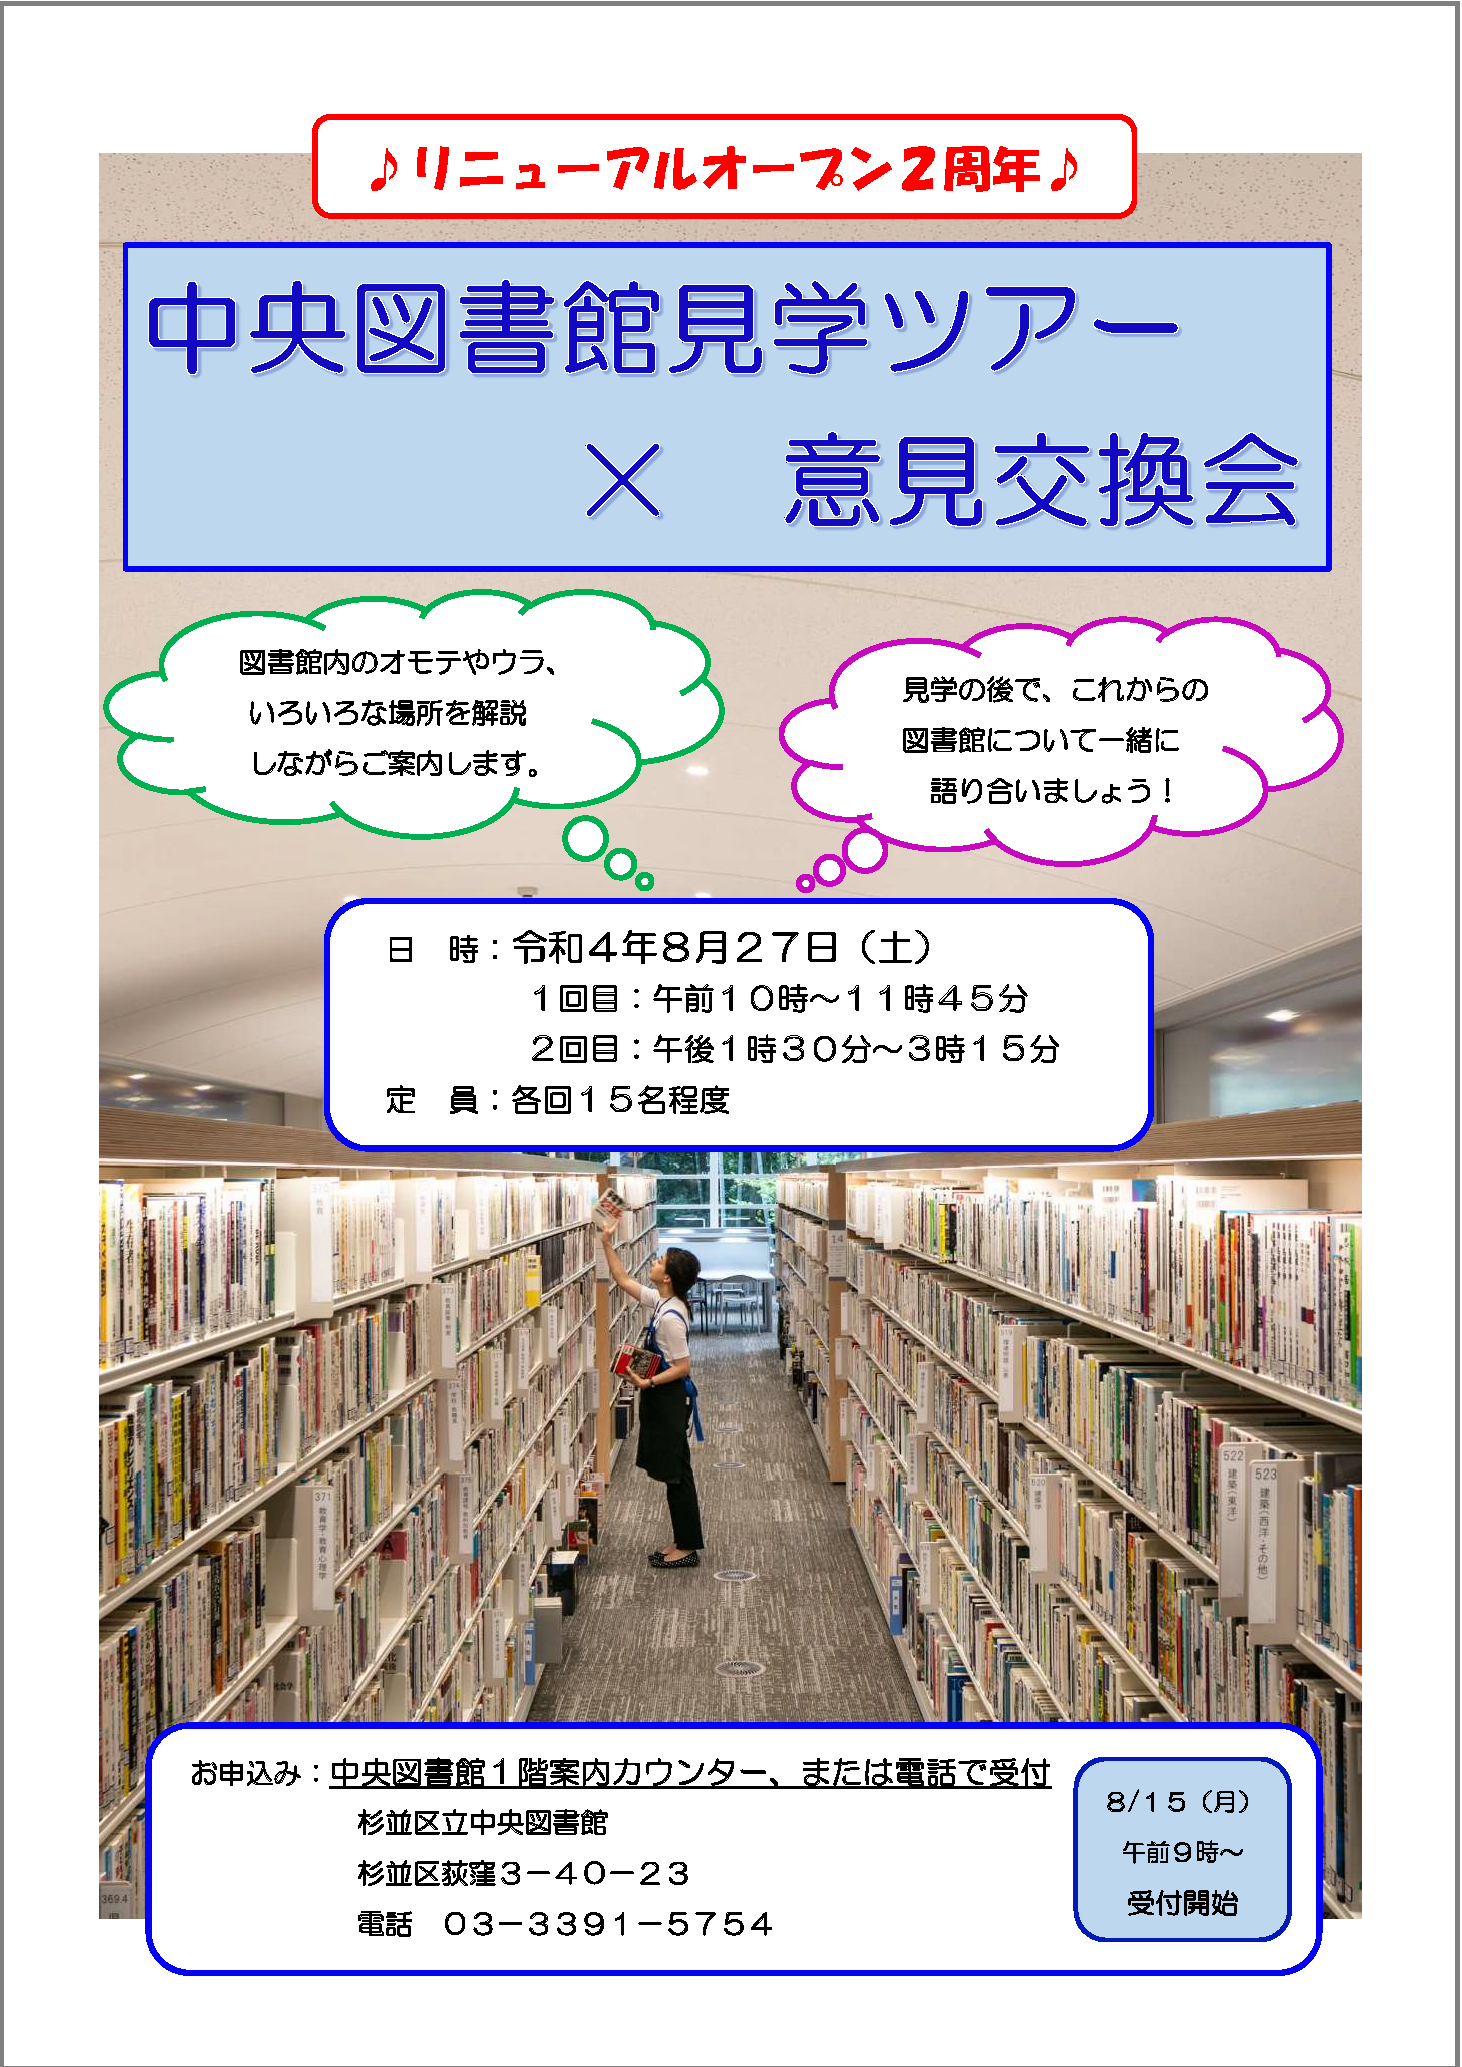 https://www.library.city.suginami.tokyo.jp/mt_files_news/f13171f7184dc1d4eb3a989931ee2f608781981a.png